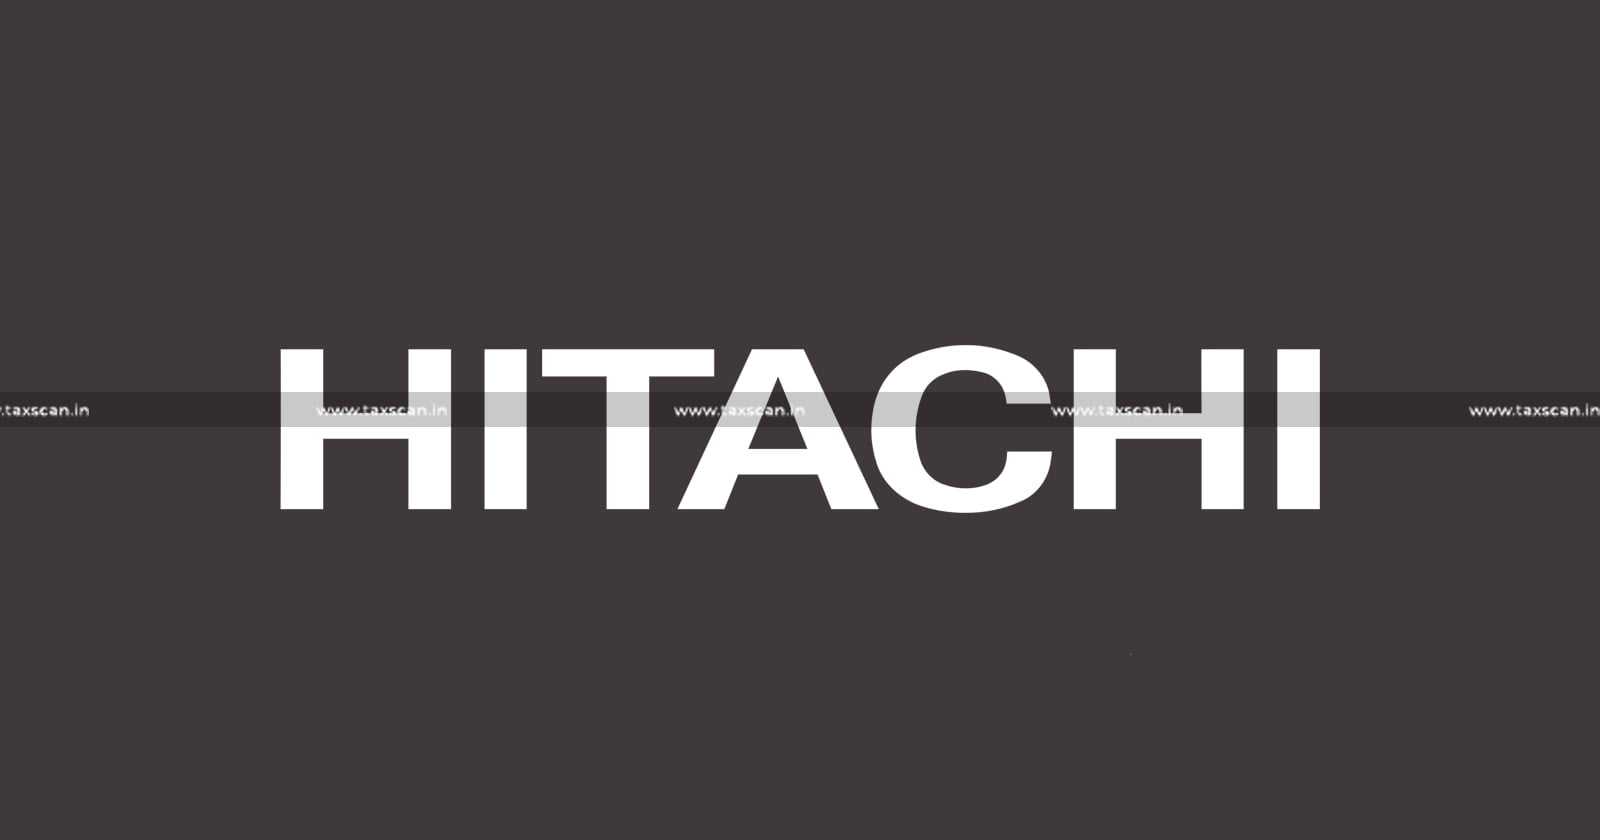 Chartered accountant vacancy - Chartered accountant vacancies in mumbai - CA vacancies - Hitachi vacancies - TAXSCAN